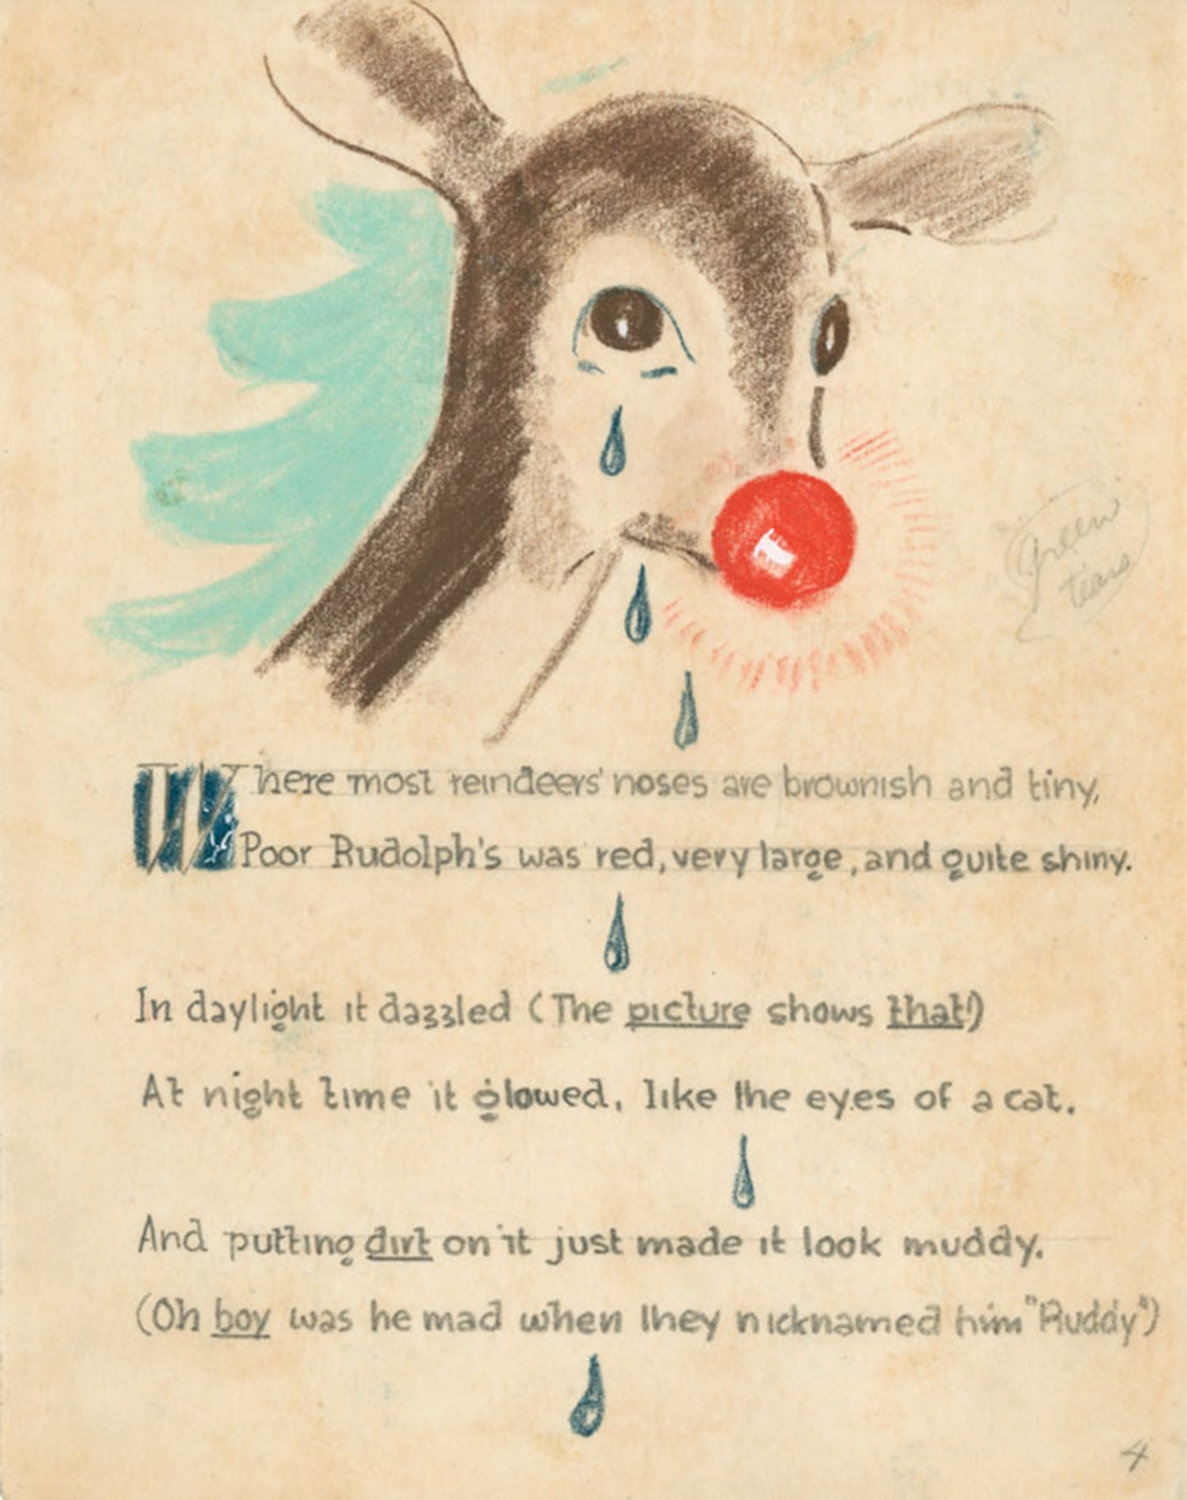 BRIGHT FROM THE START—An early rendering of Rudolph The Red-Nosed Reindeer, first published in 1939 by Montgomery Ward.